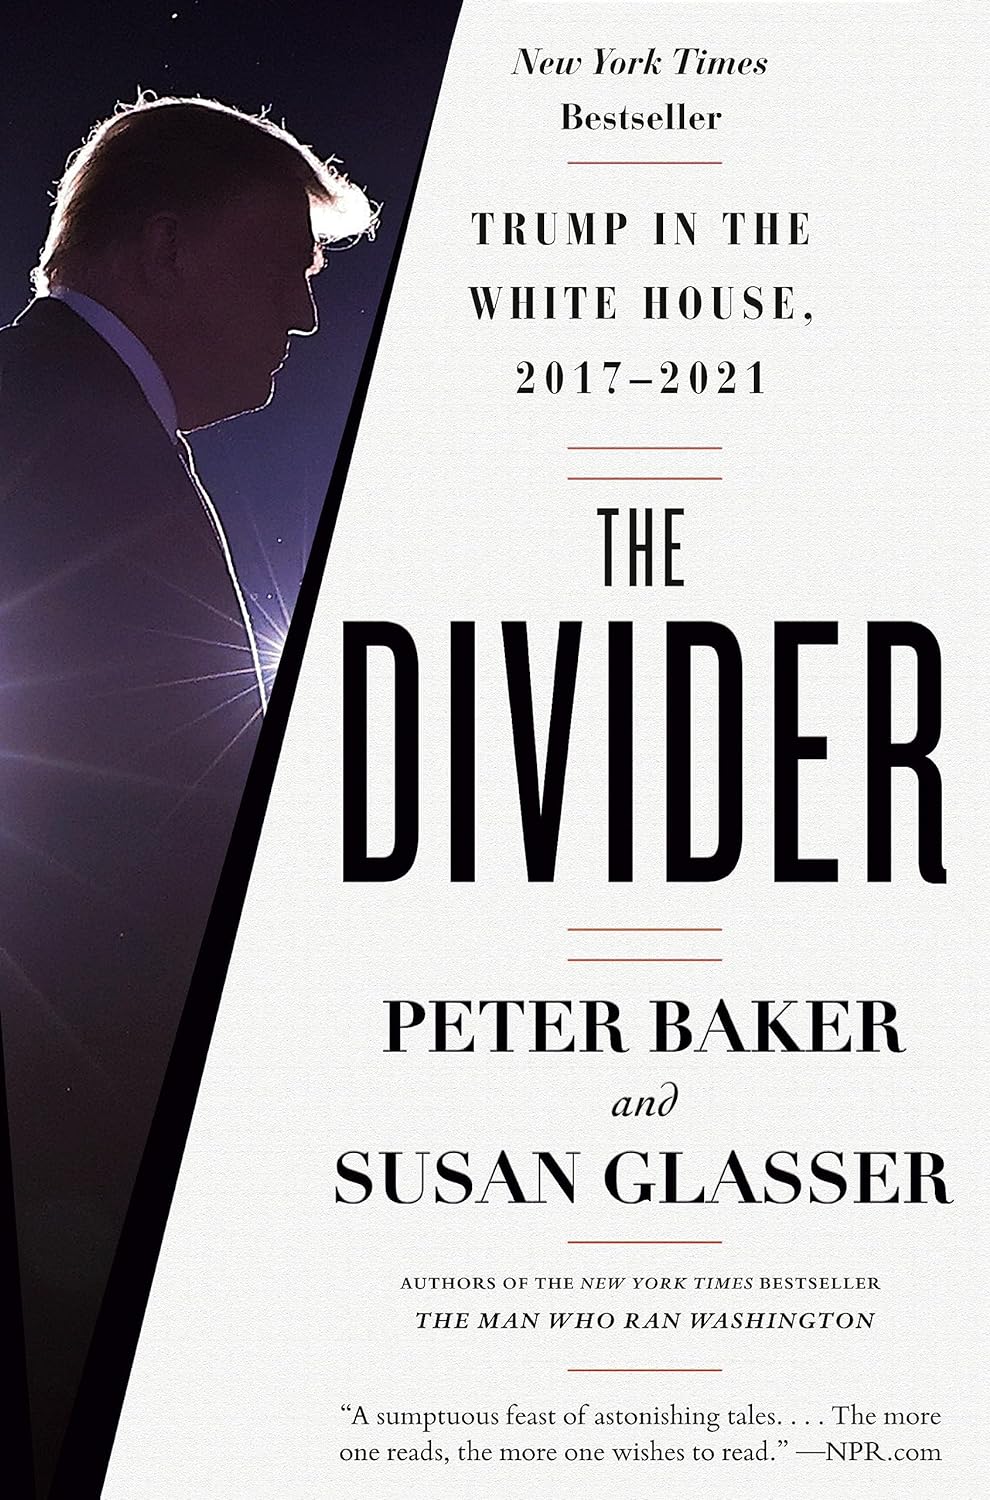 The Divider Trump in the White House, 2017-2021 - SureShot Books Publishing LLC